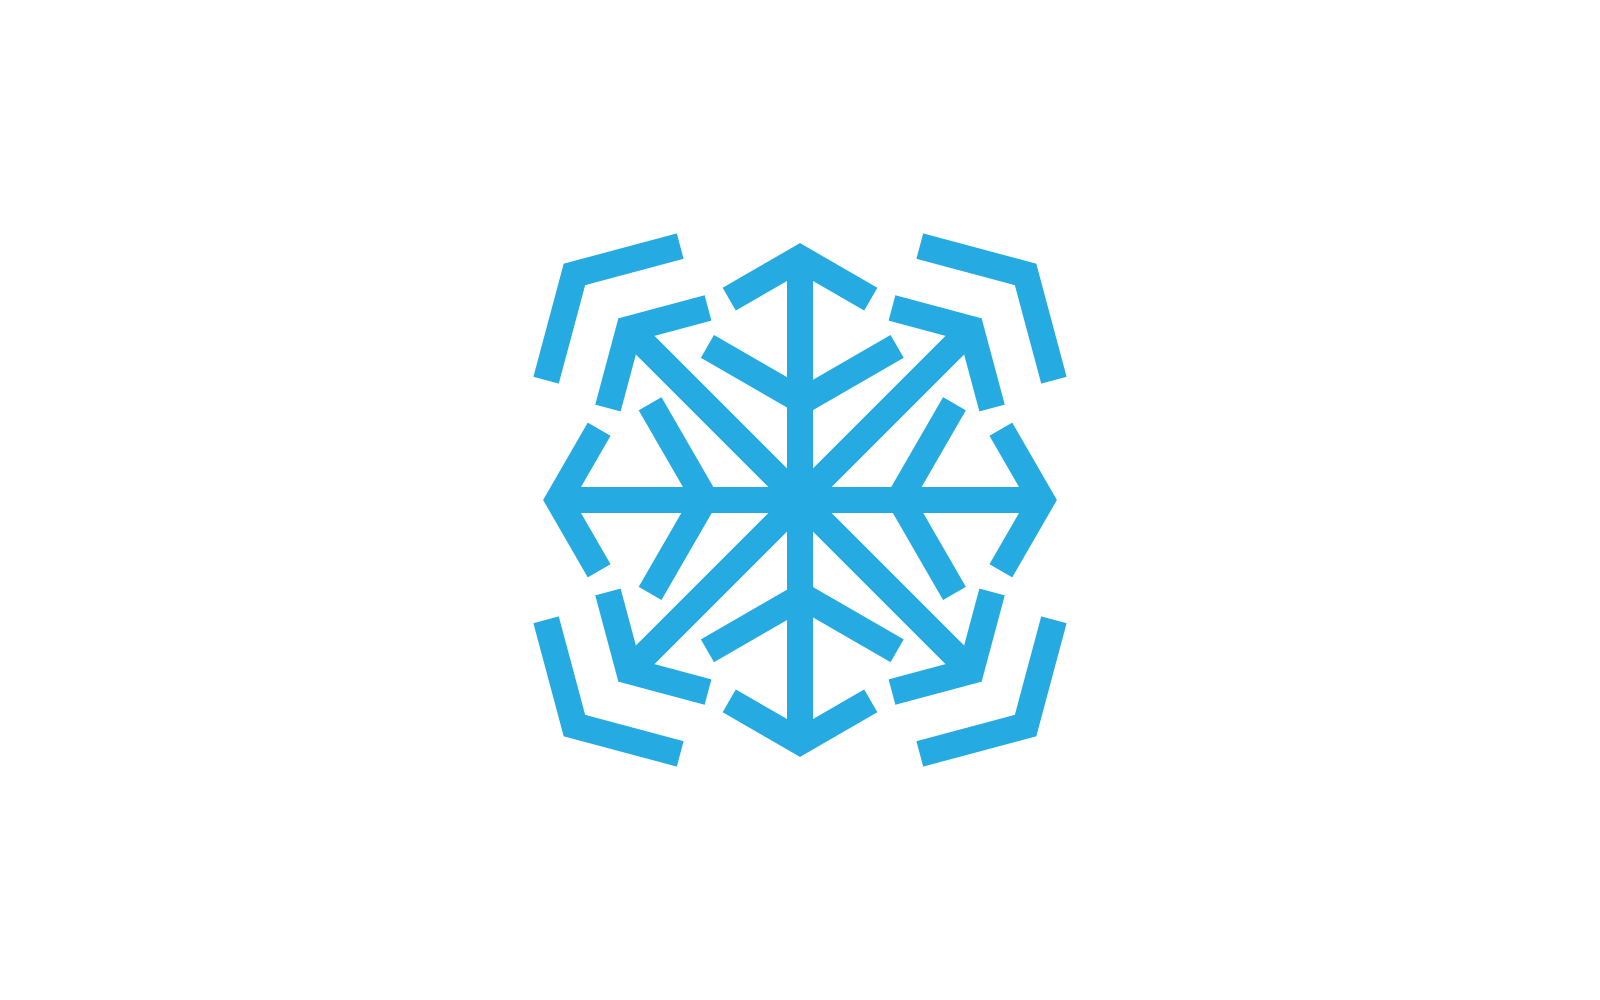 Snowflakes icon ilustration vector flat design template